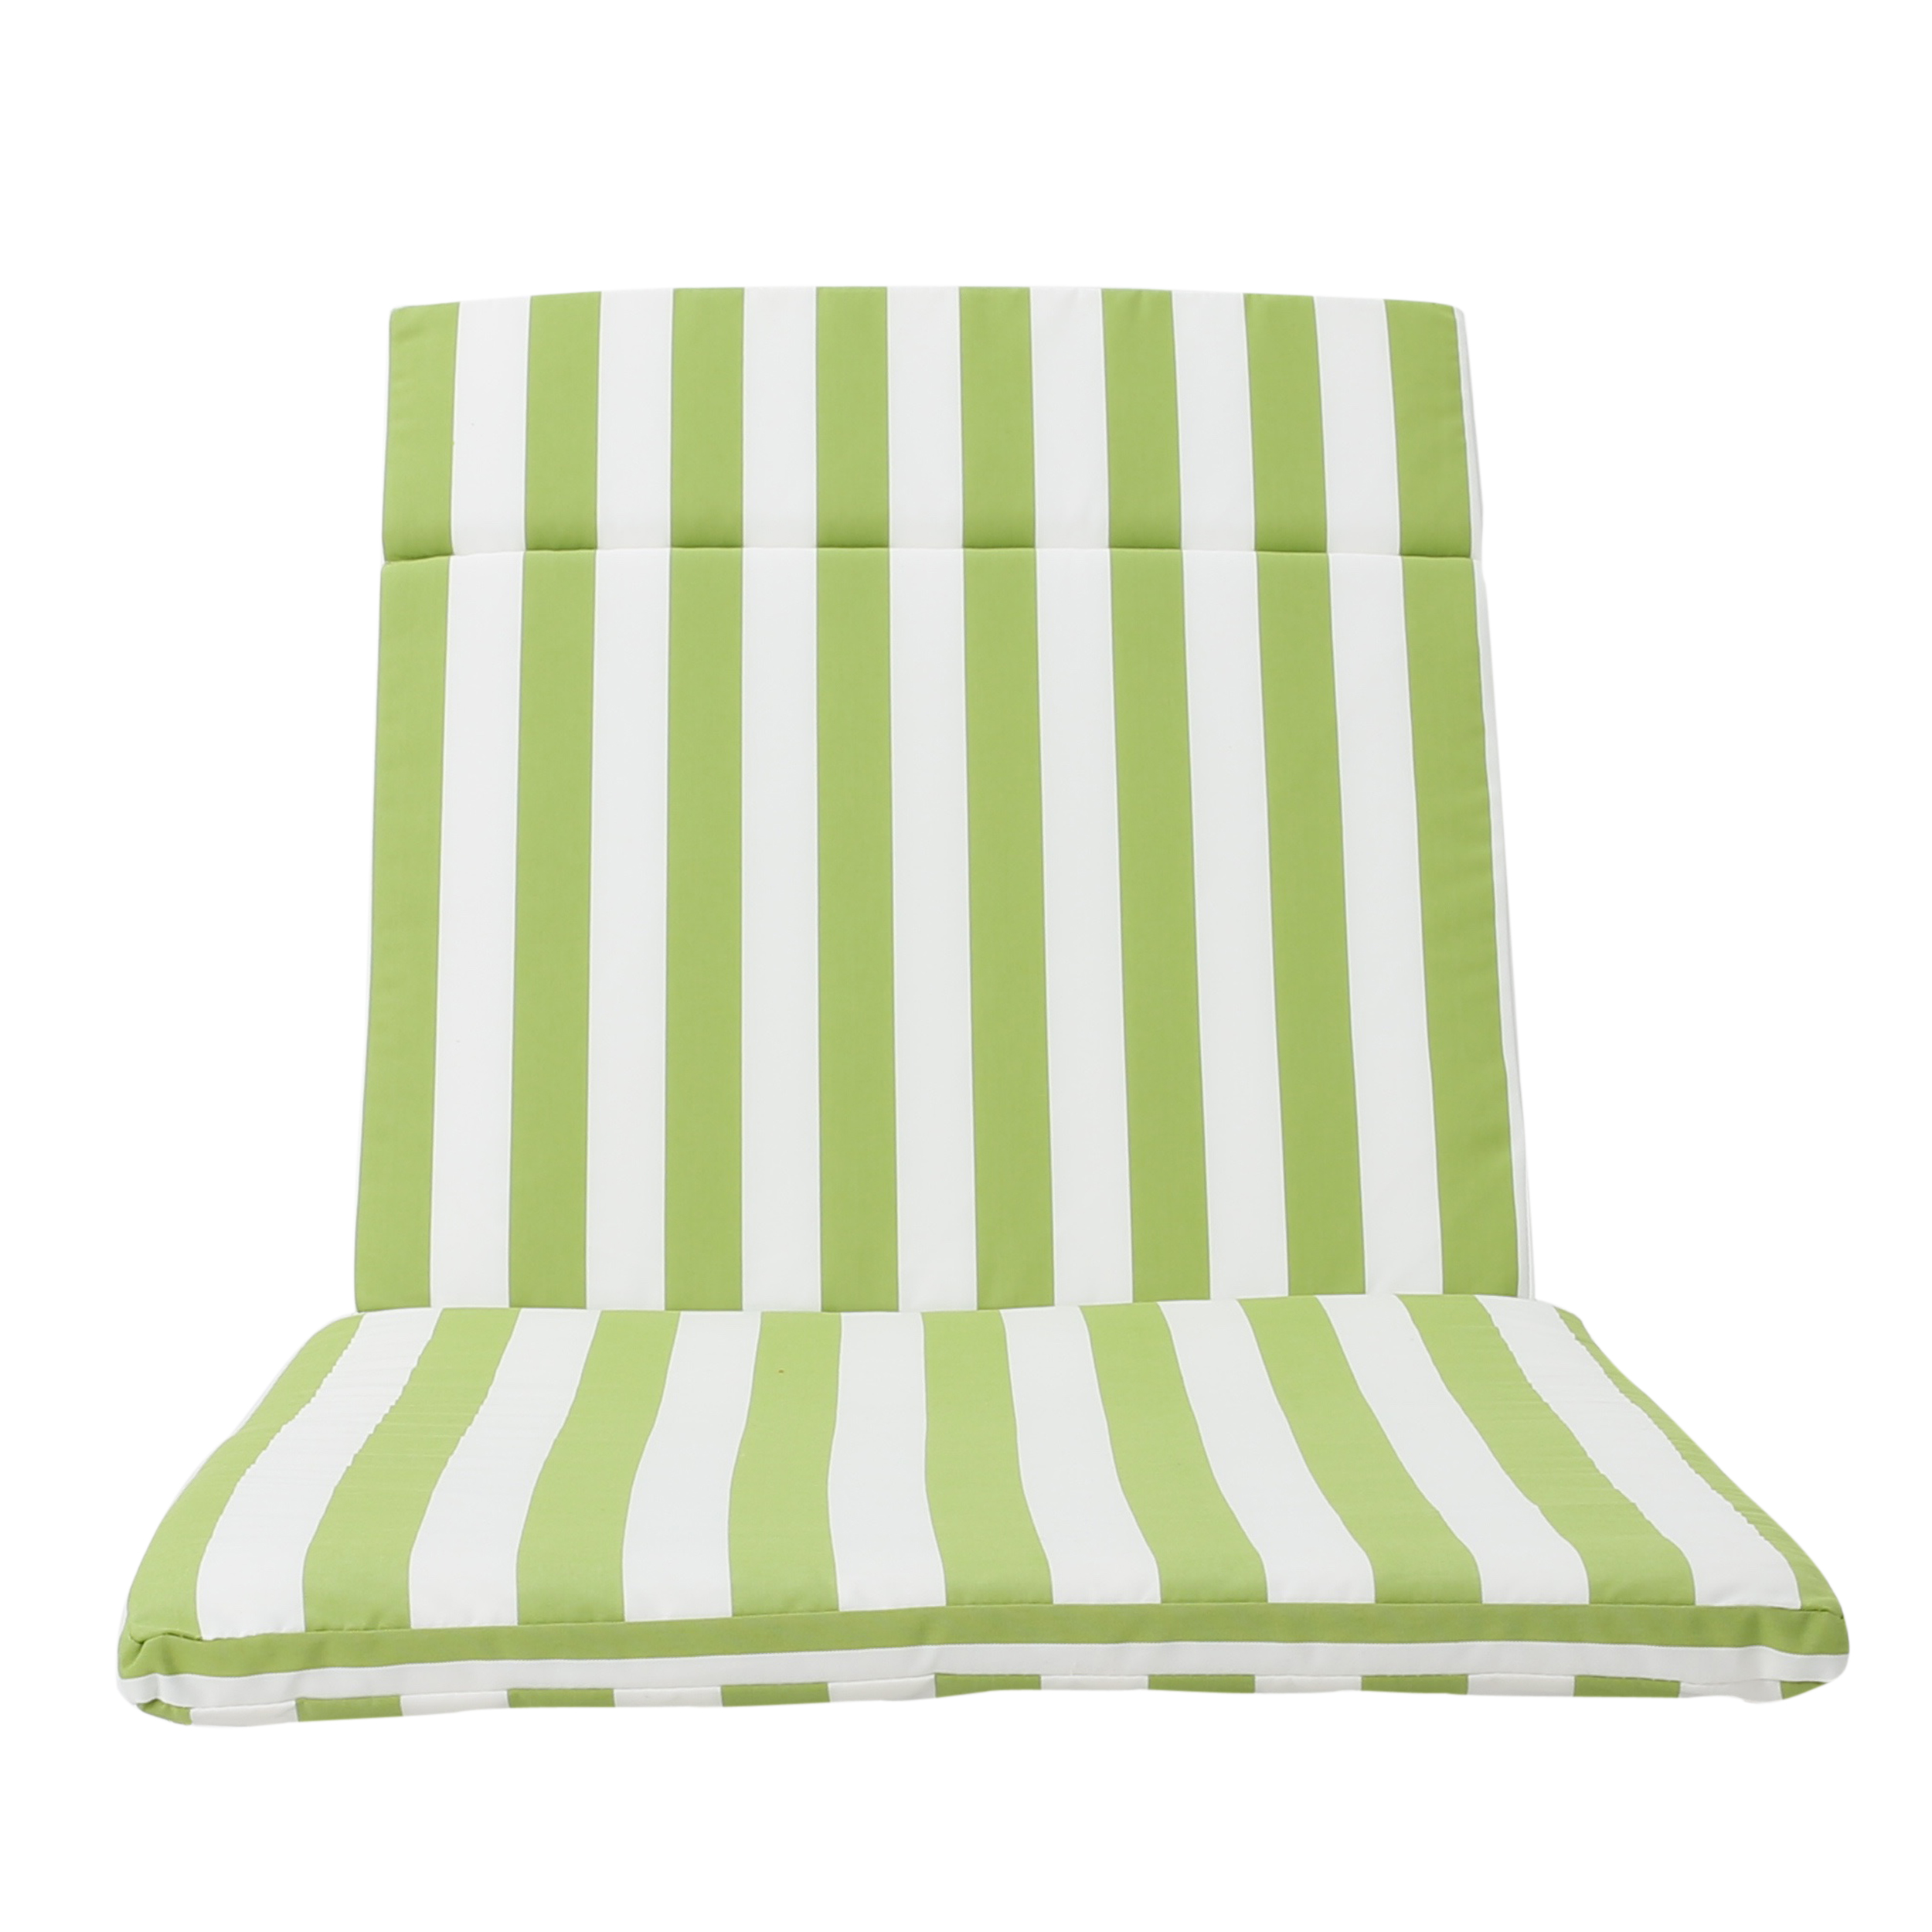 Anthony Outdoor Water Resistant Chaise Lounge Cushion, Green and White Stripe - image 2 of 6